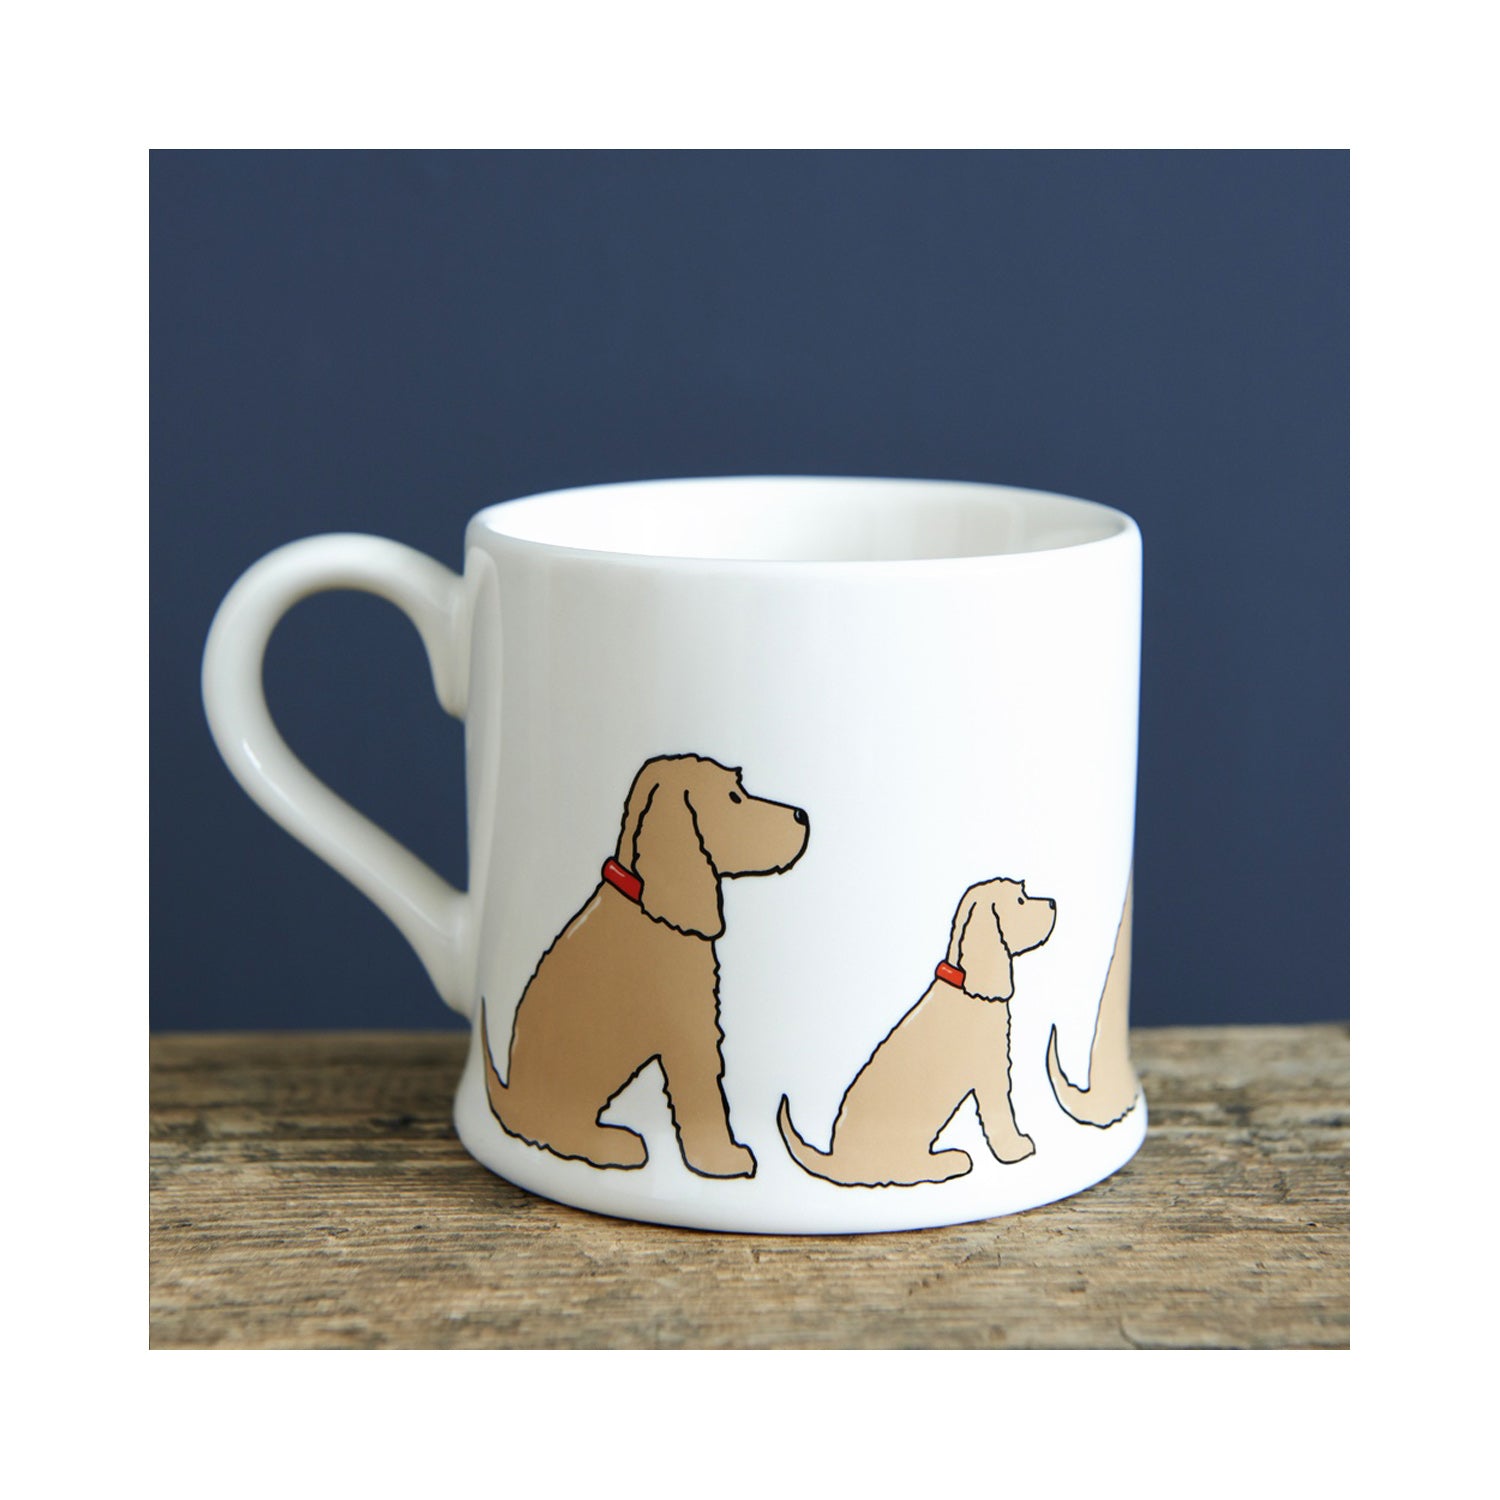 Dog Lover Gifts available at Dog Krazy Gifts - Hetty The Golden Cocker Spaniel Mug - part of the Sweet William range available from Dog Krazy Gifts